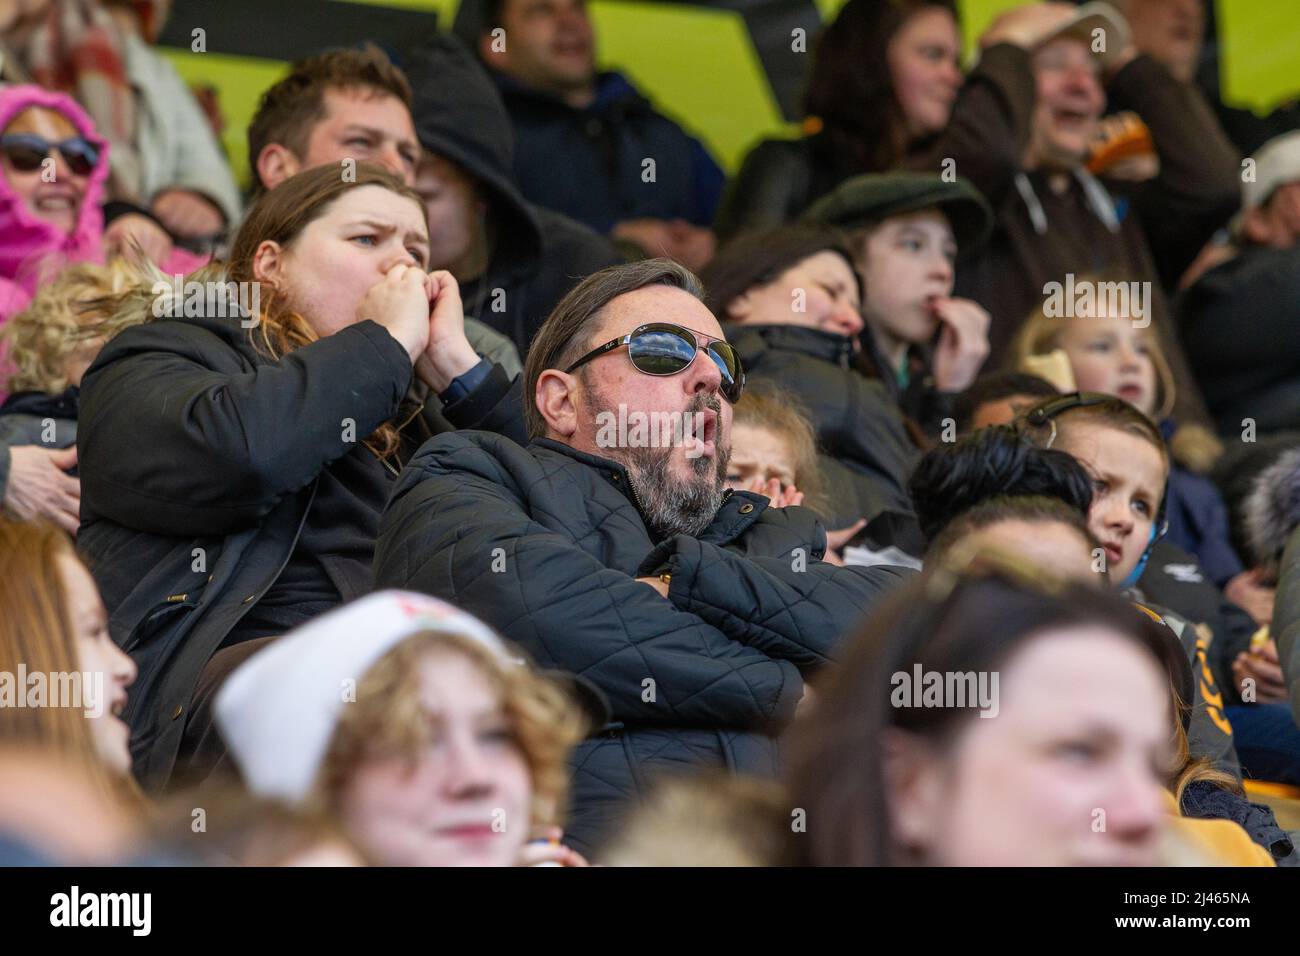 Football / soccer fans and spectators with facial expressions react to game they are watching Stock Photo